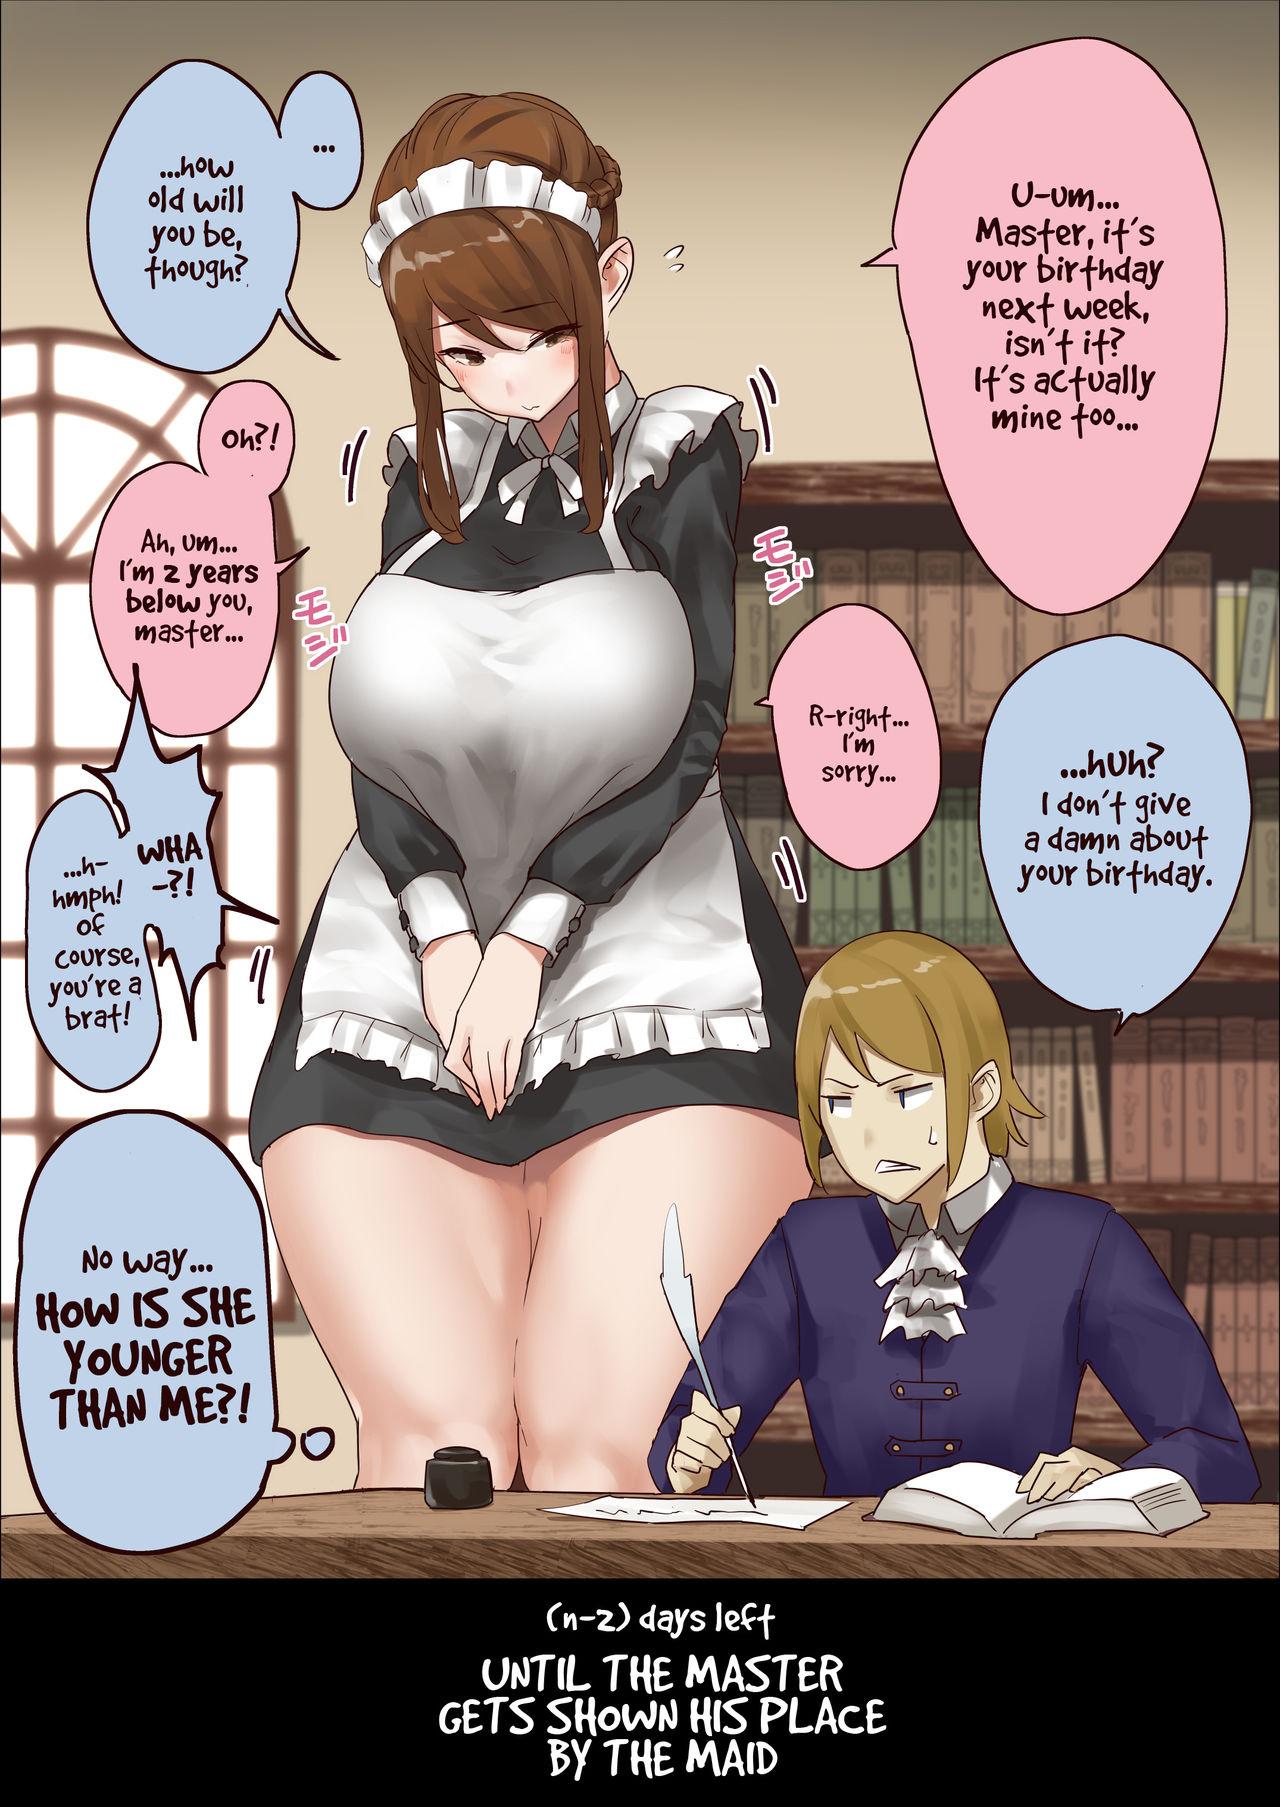 Blackdick master and maid - Original Massages - Page 3